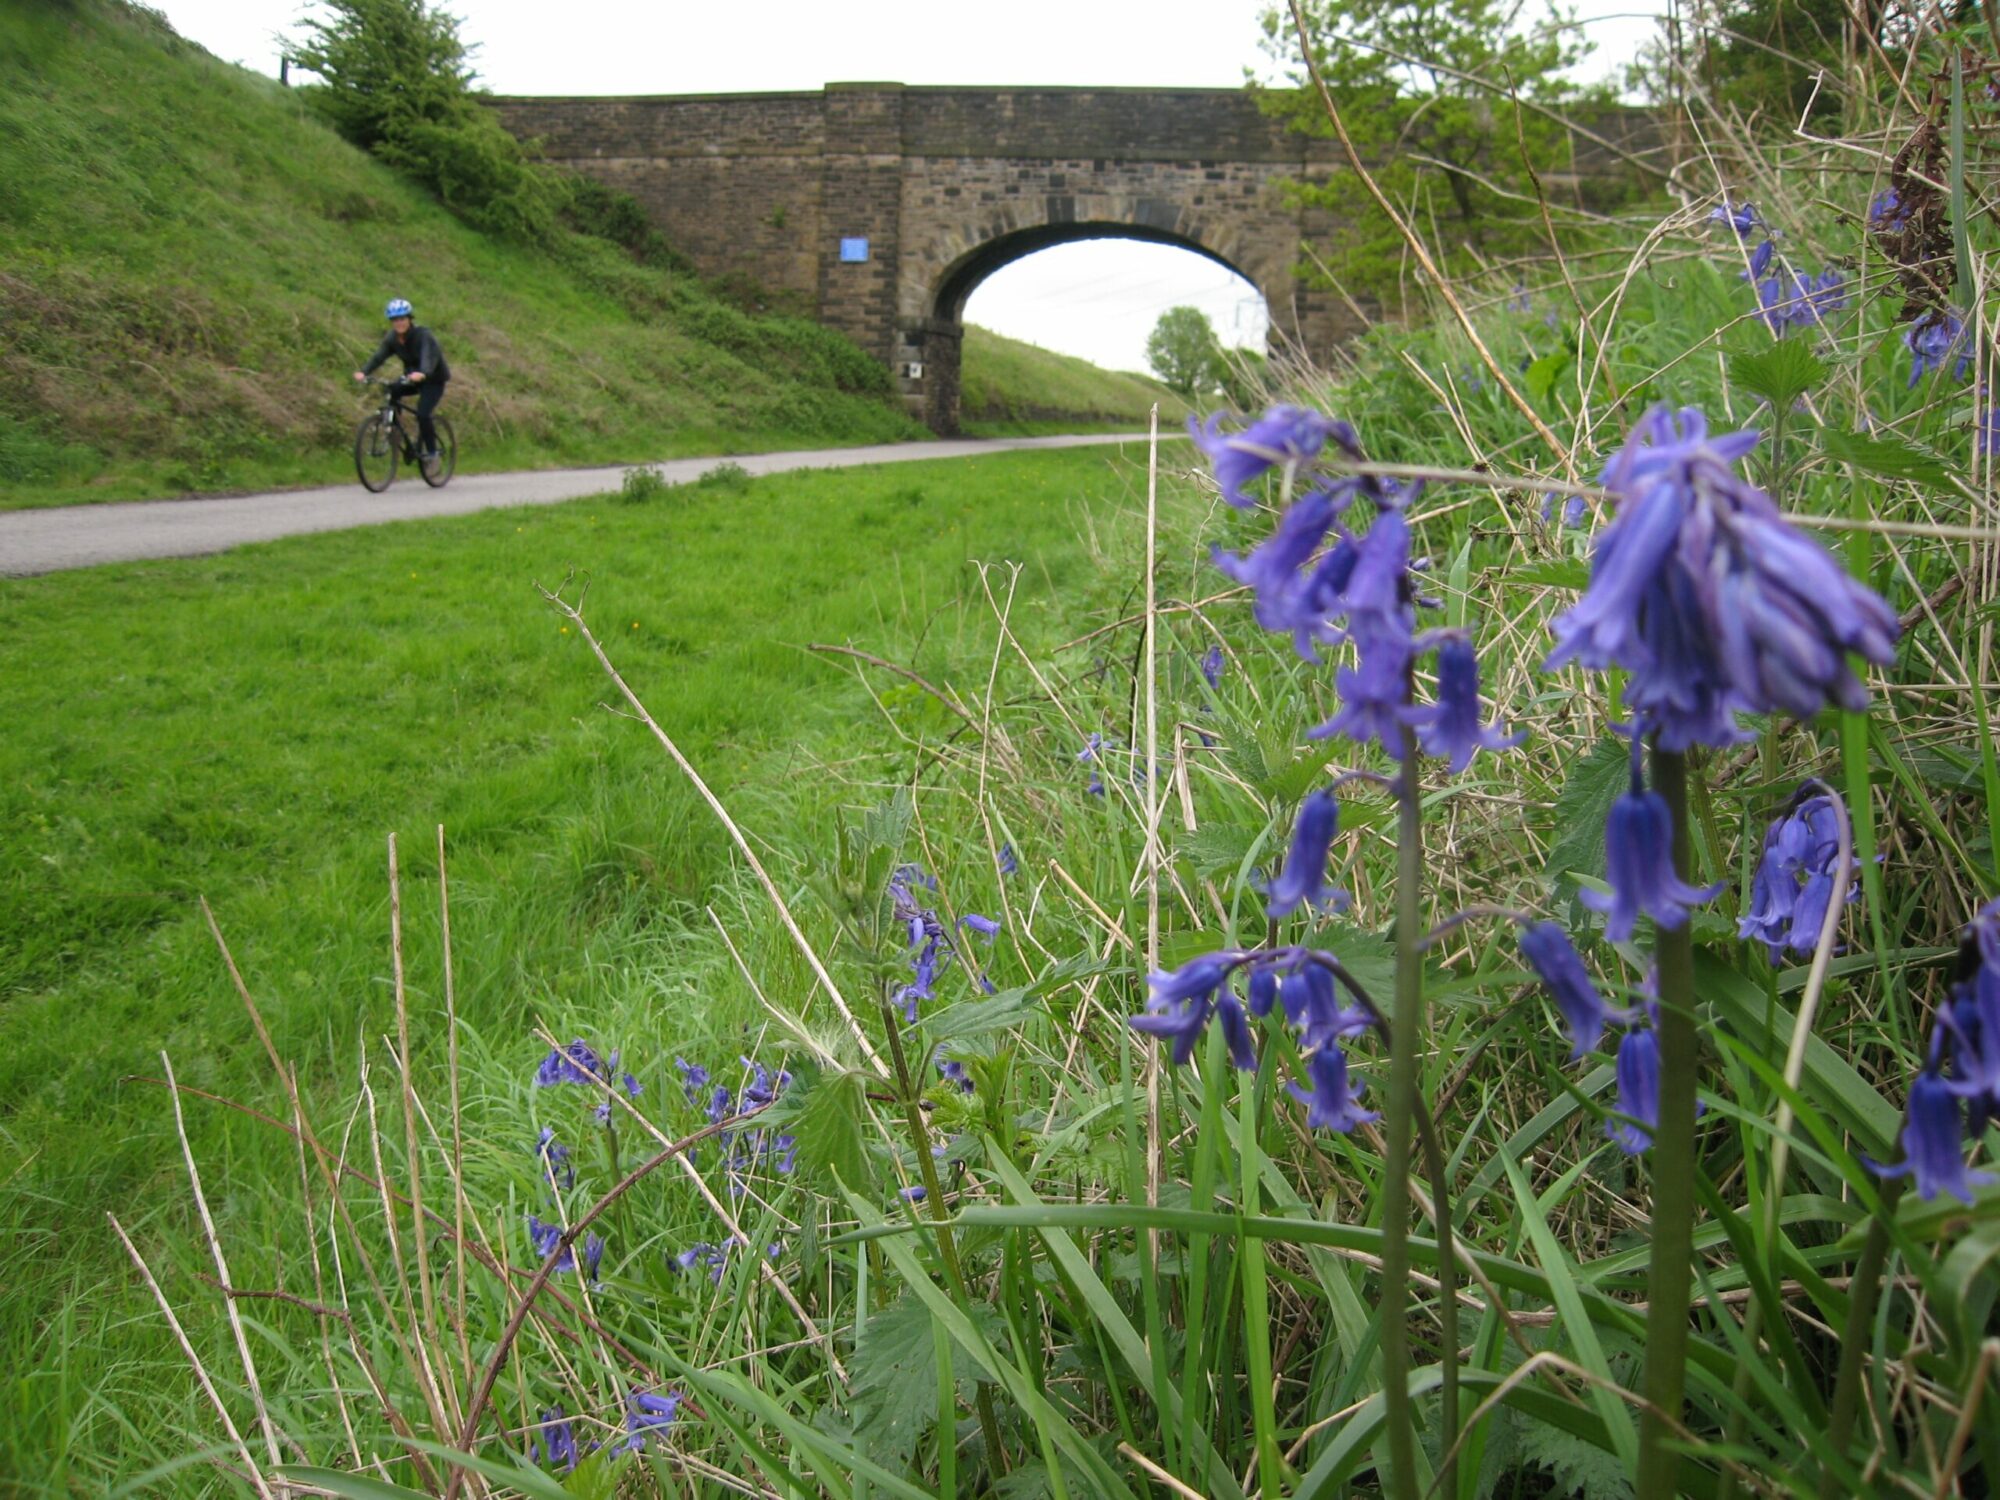 Image name bluebells scaled the 1 image from the post Spen Valley Greenway in Yorkshire.com.